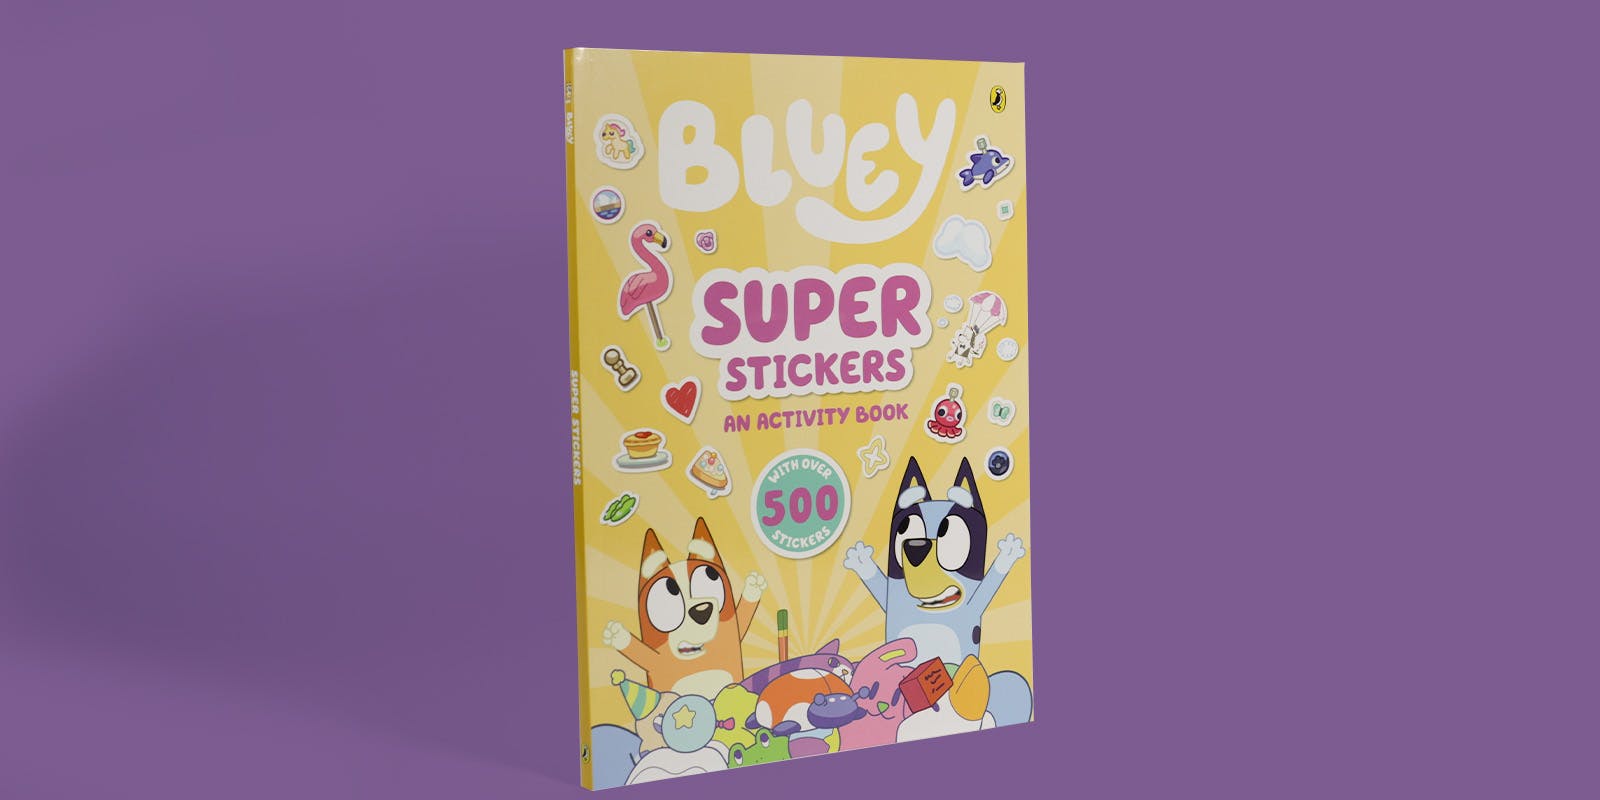 A look inside Bluey: Super Stickers